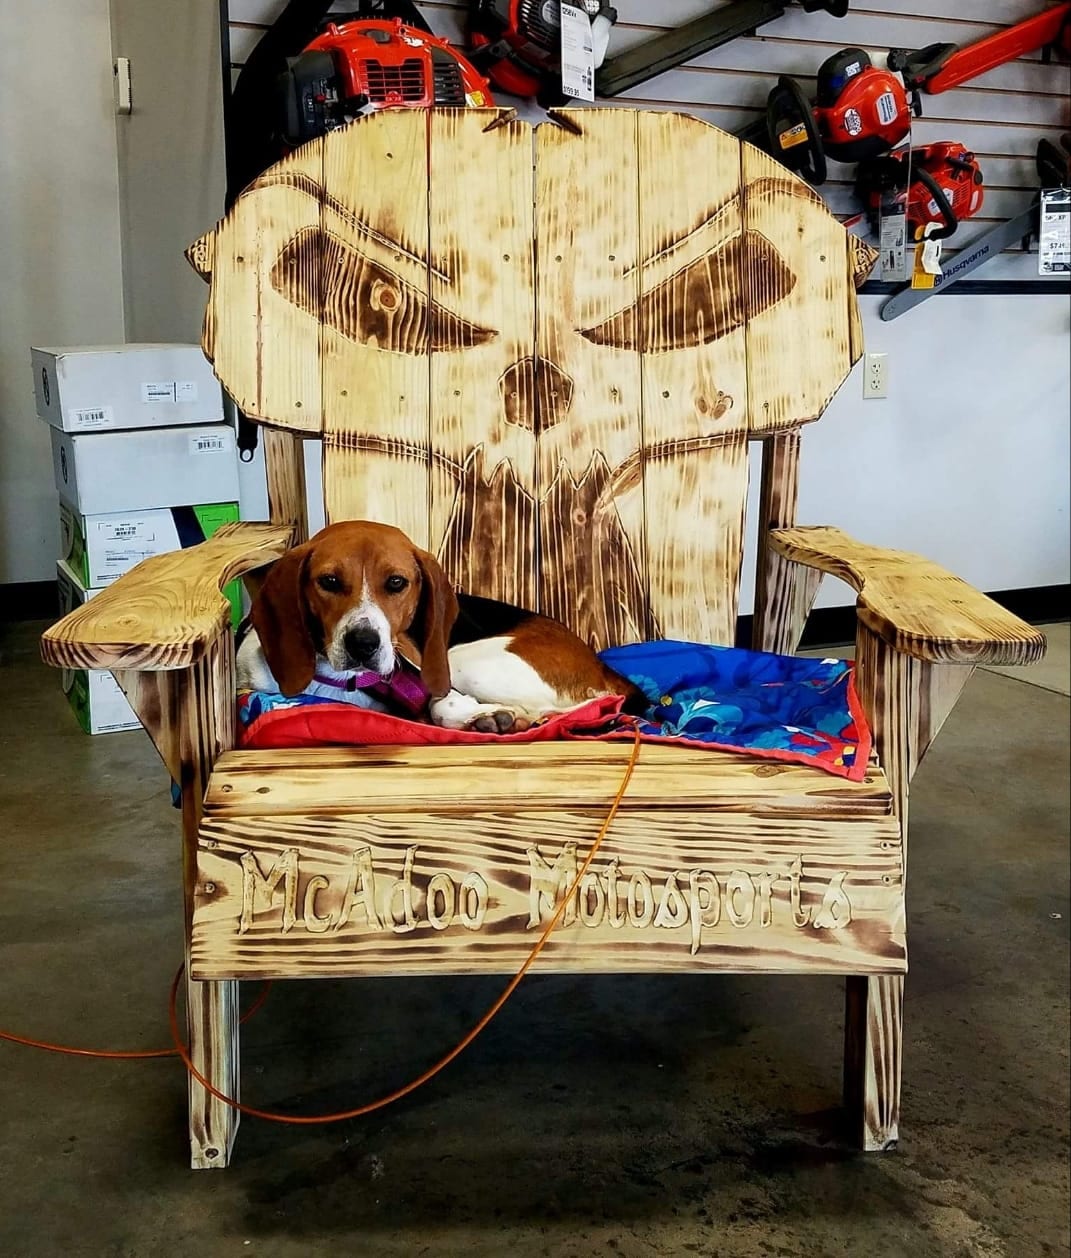 Comfy dog in awesome McAdoo Motosports chair.